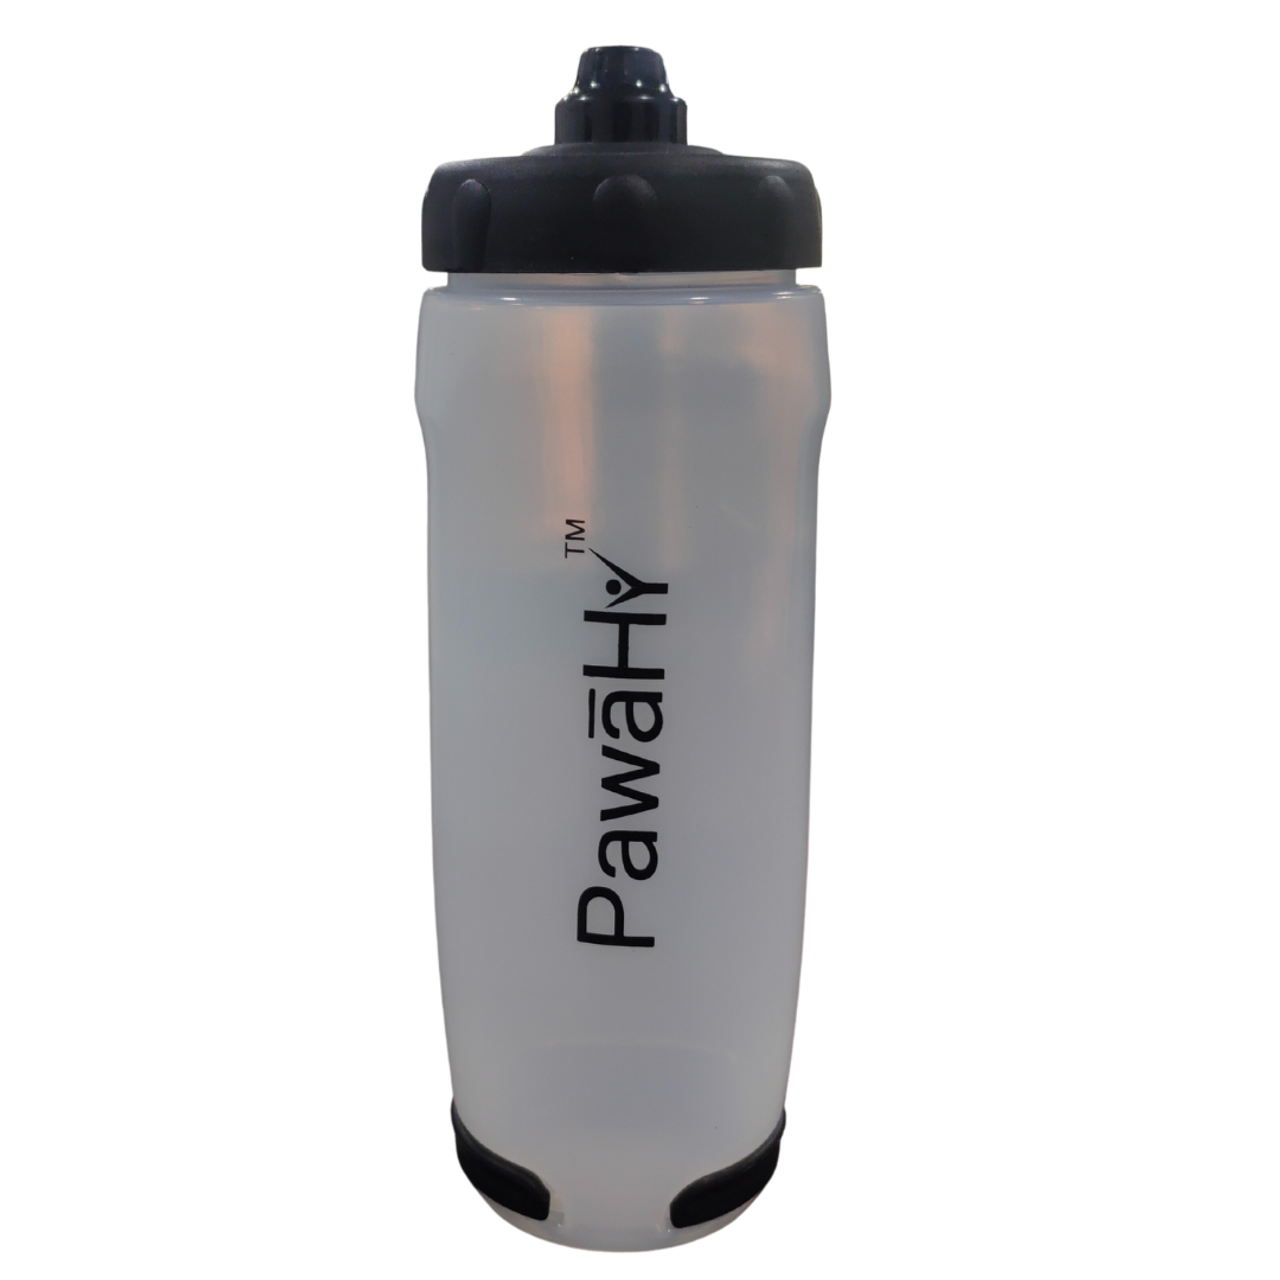 PawaHy Sports Water Bottle For Gym, Protein Shaker Bottle, Gallon Water Bottle (500 Ml) BPA Free Eco